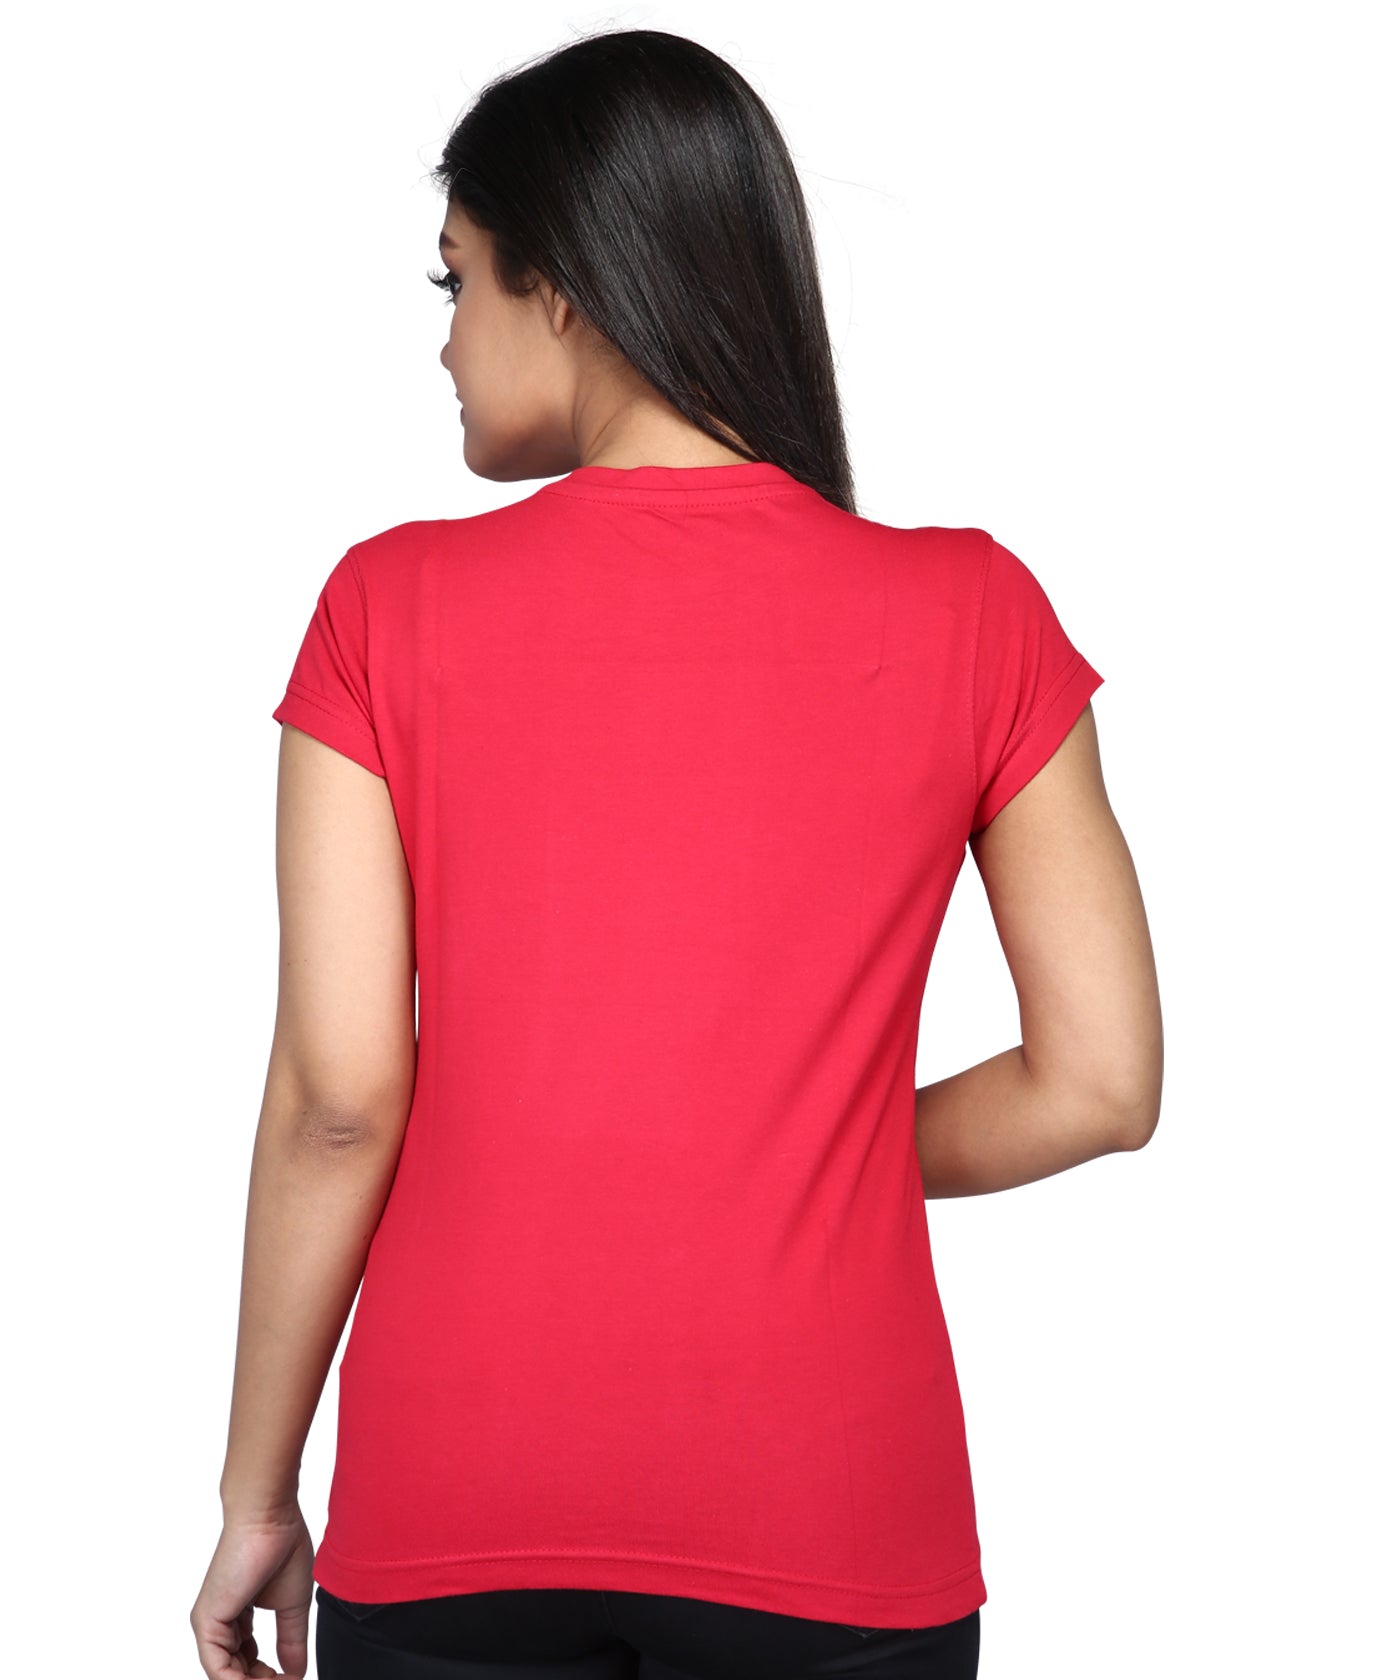 Stay Wild and Free - Premium Round Neck Cotton Tees for Women - Red